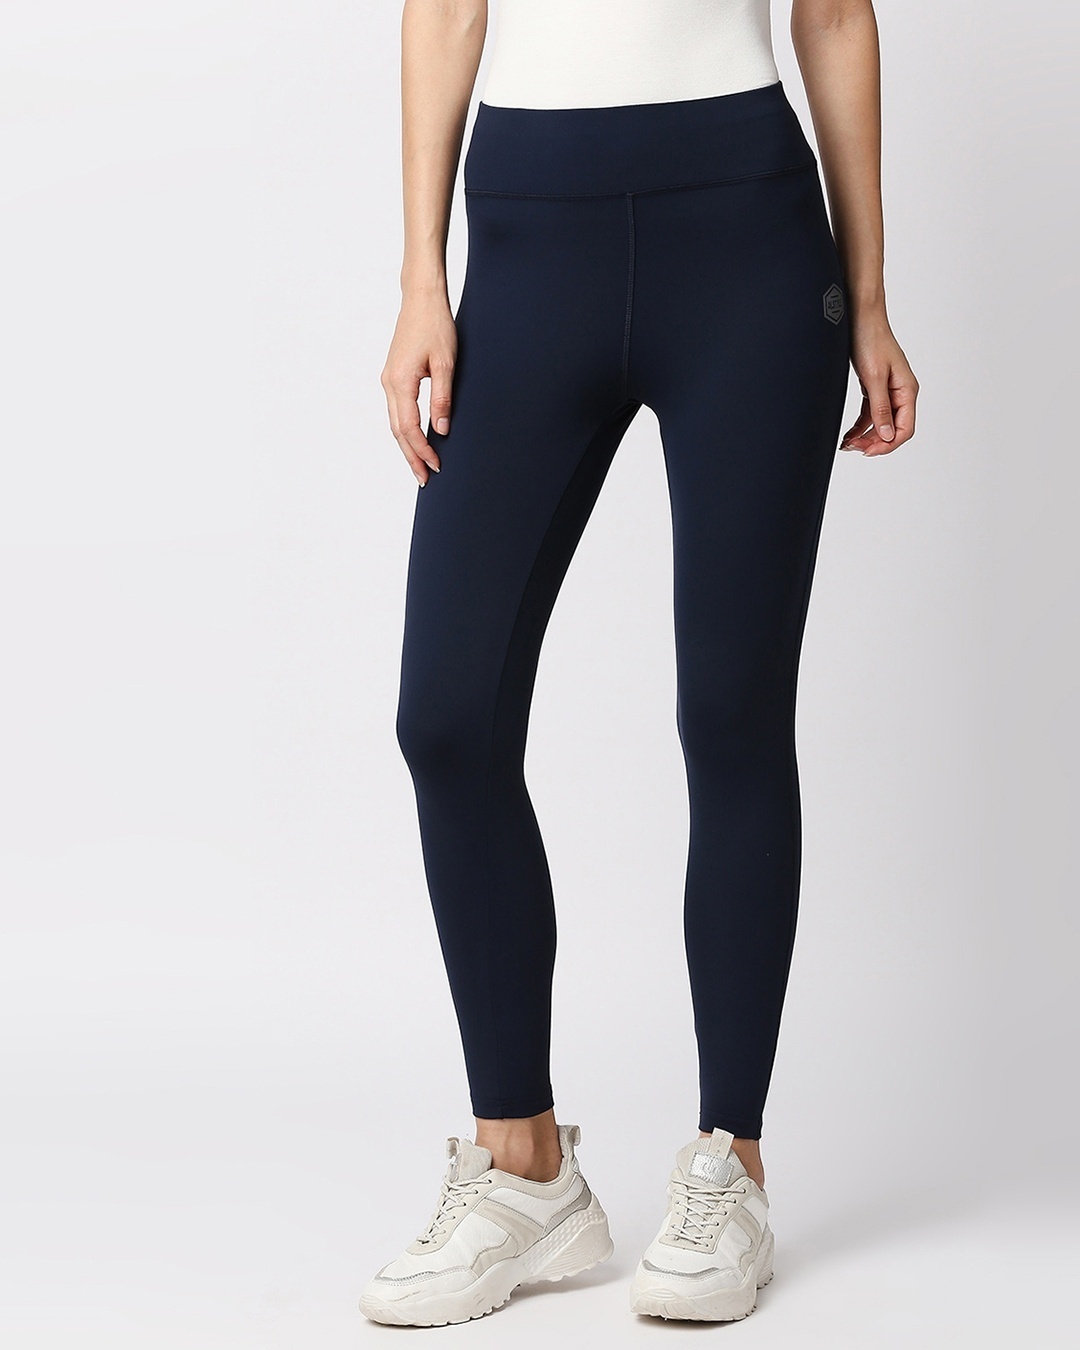 Shop Women's Blue Casual Tights-Front